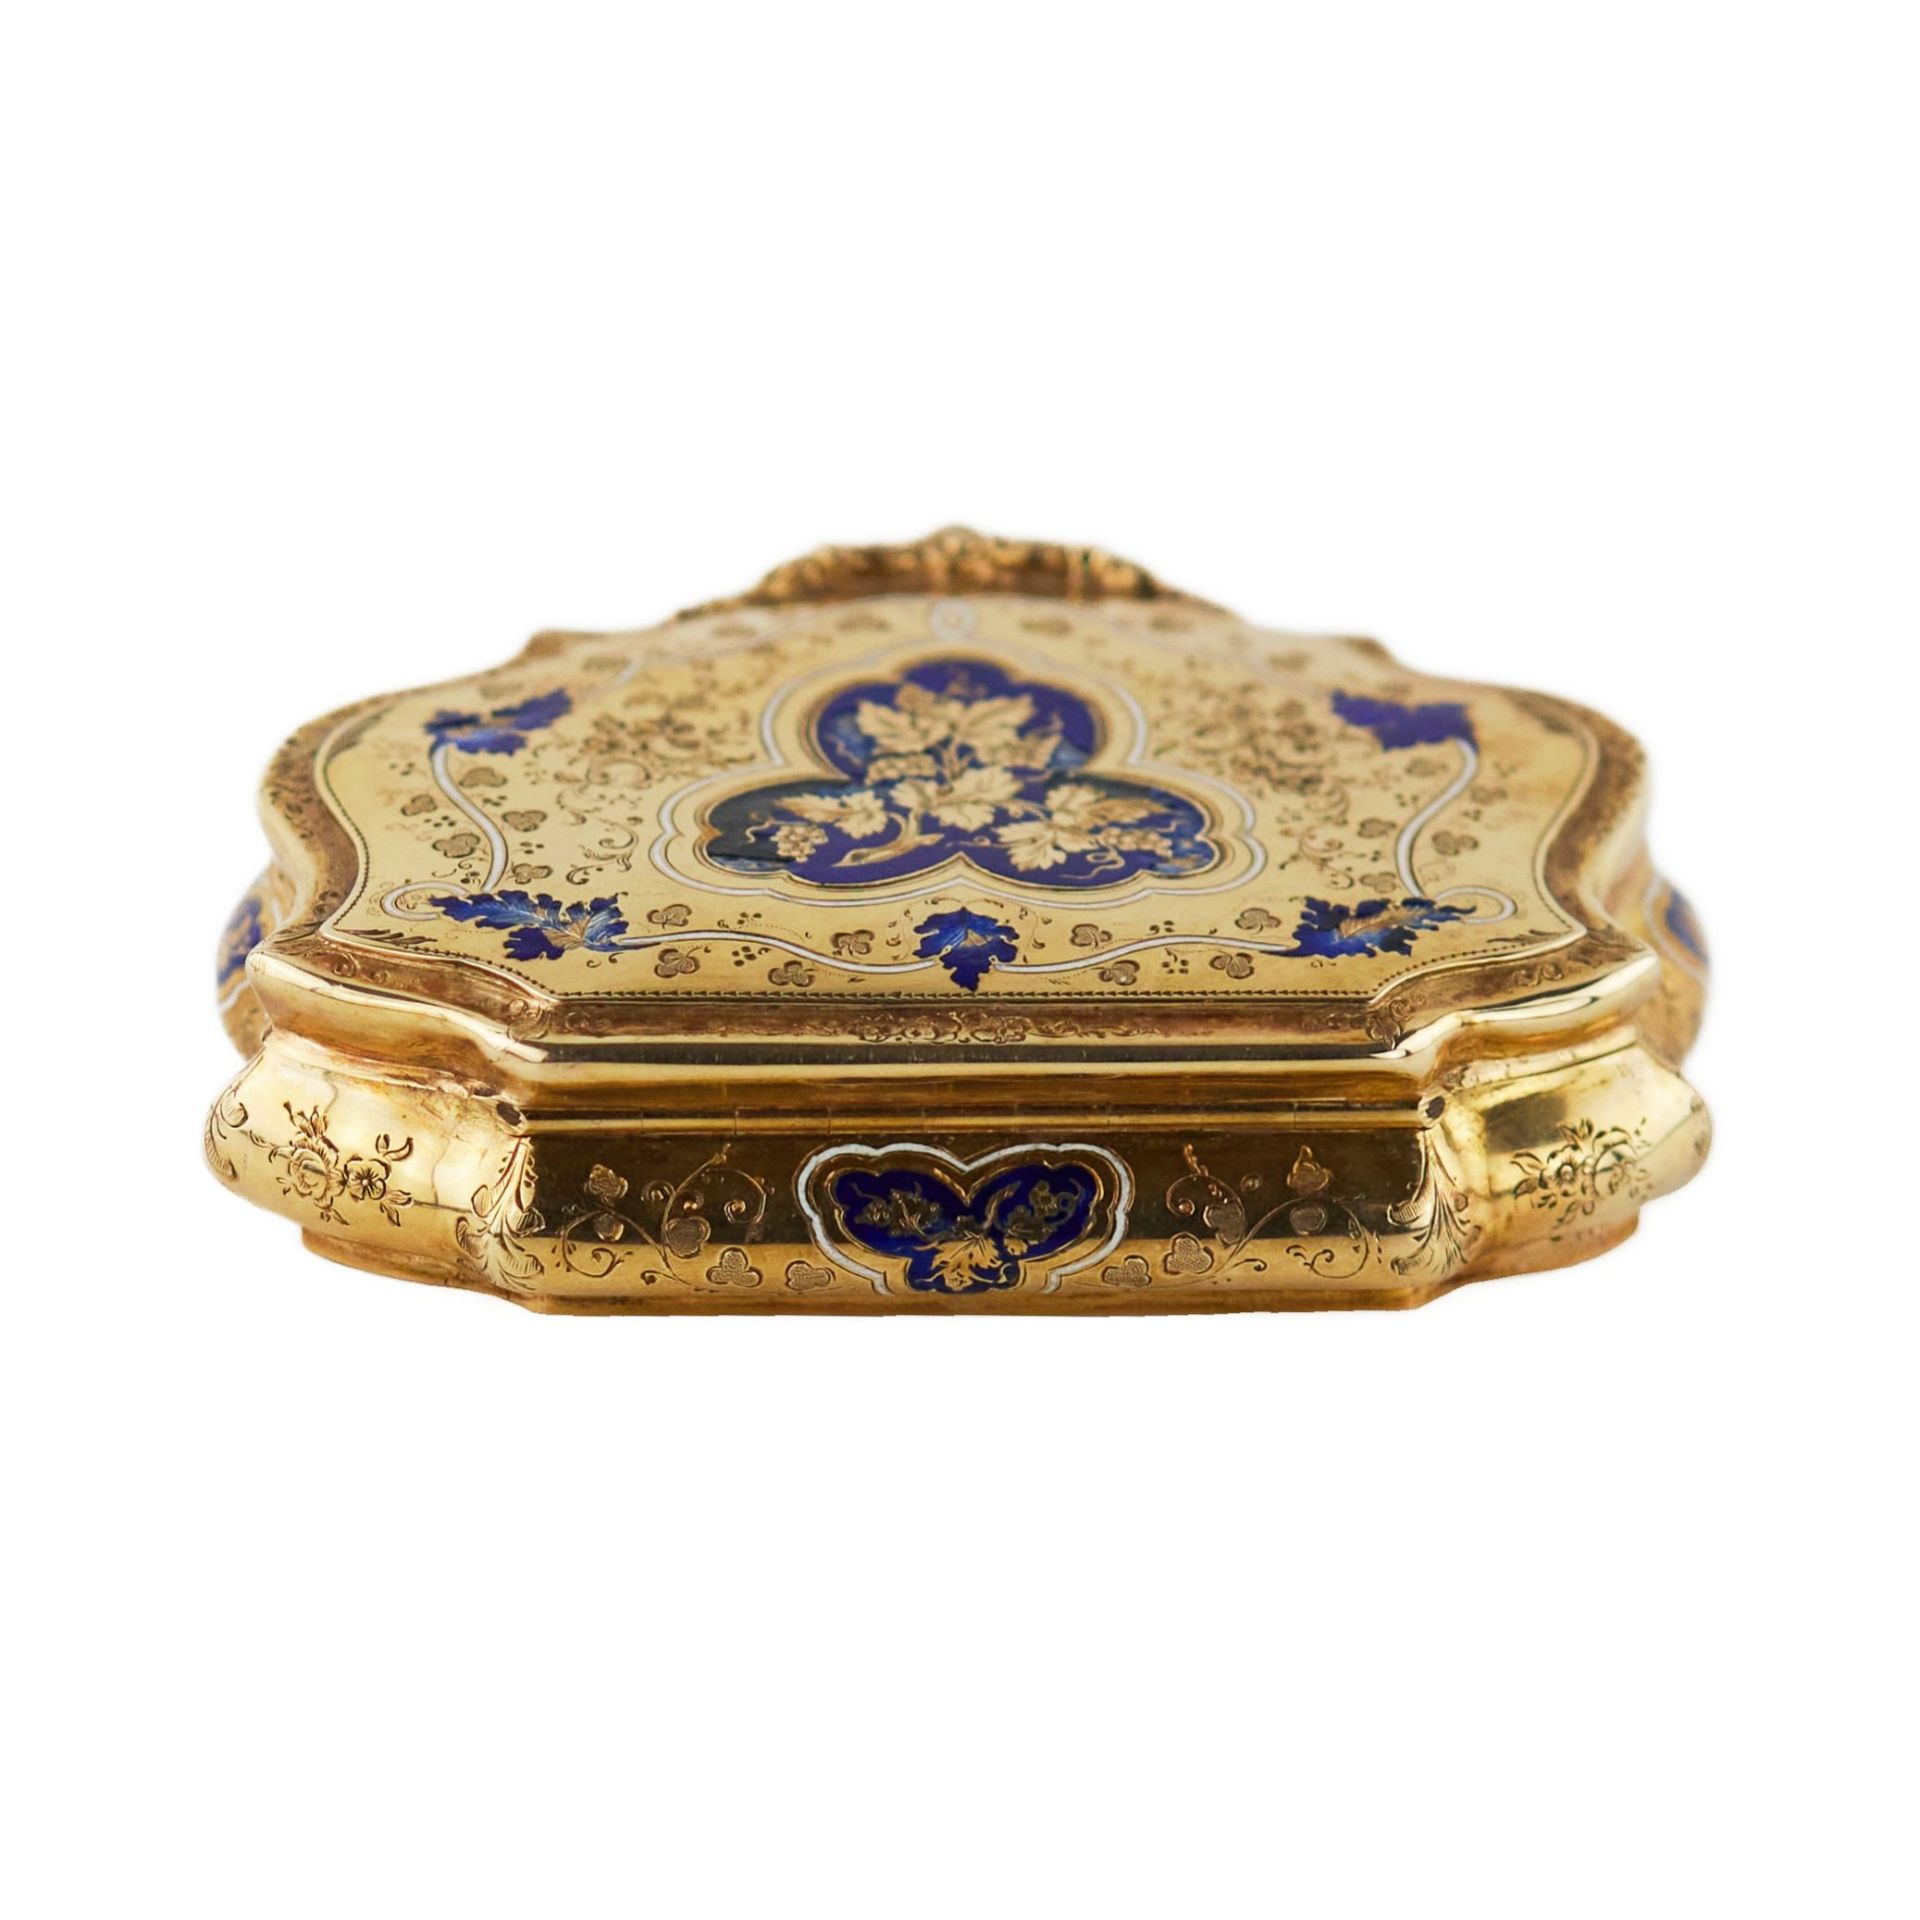 Gold snuff box with engraved ornament and blue enamel. 20th century. - Bild 4 aus 10